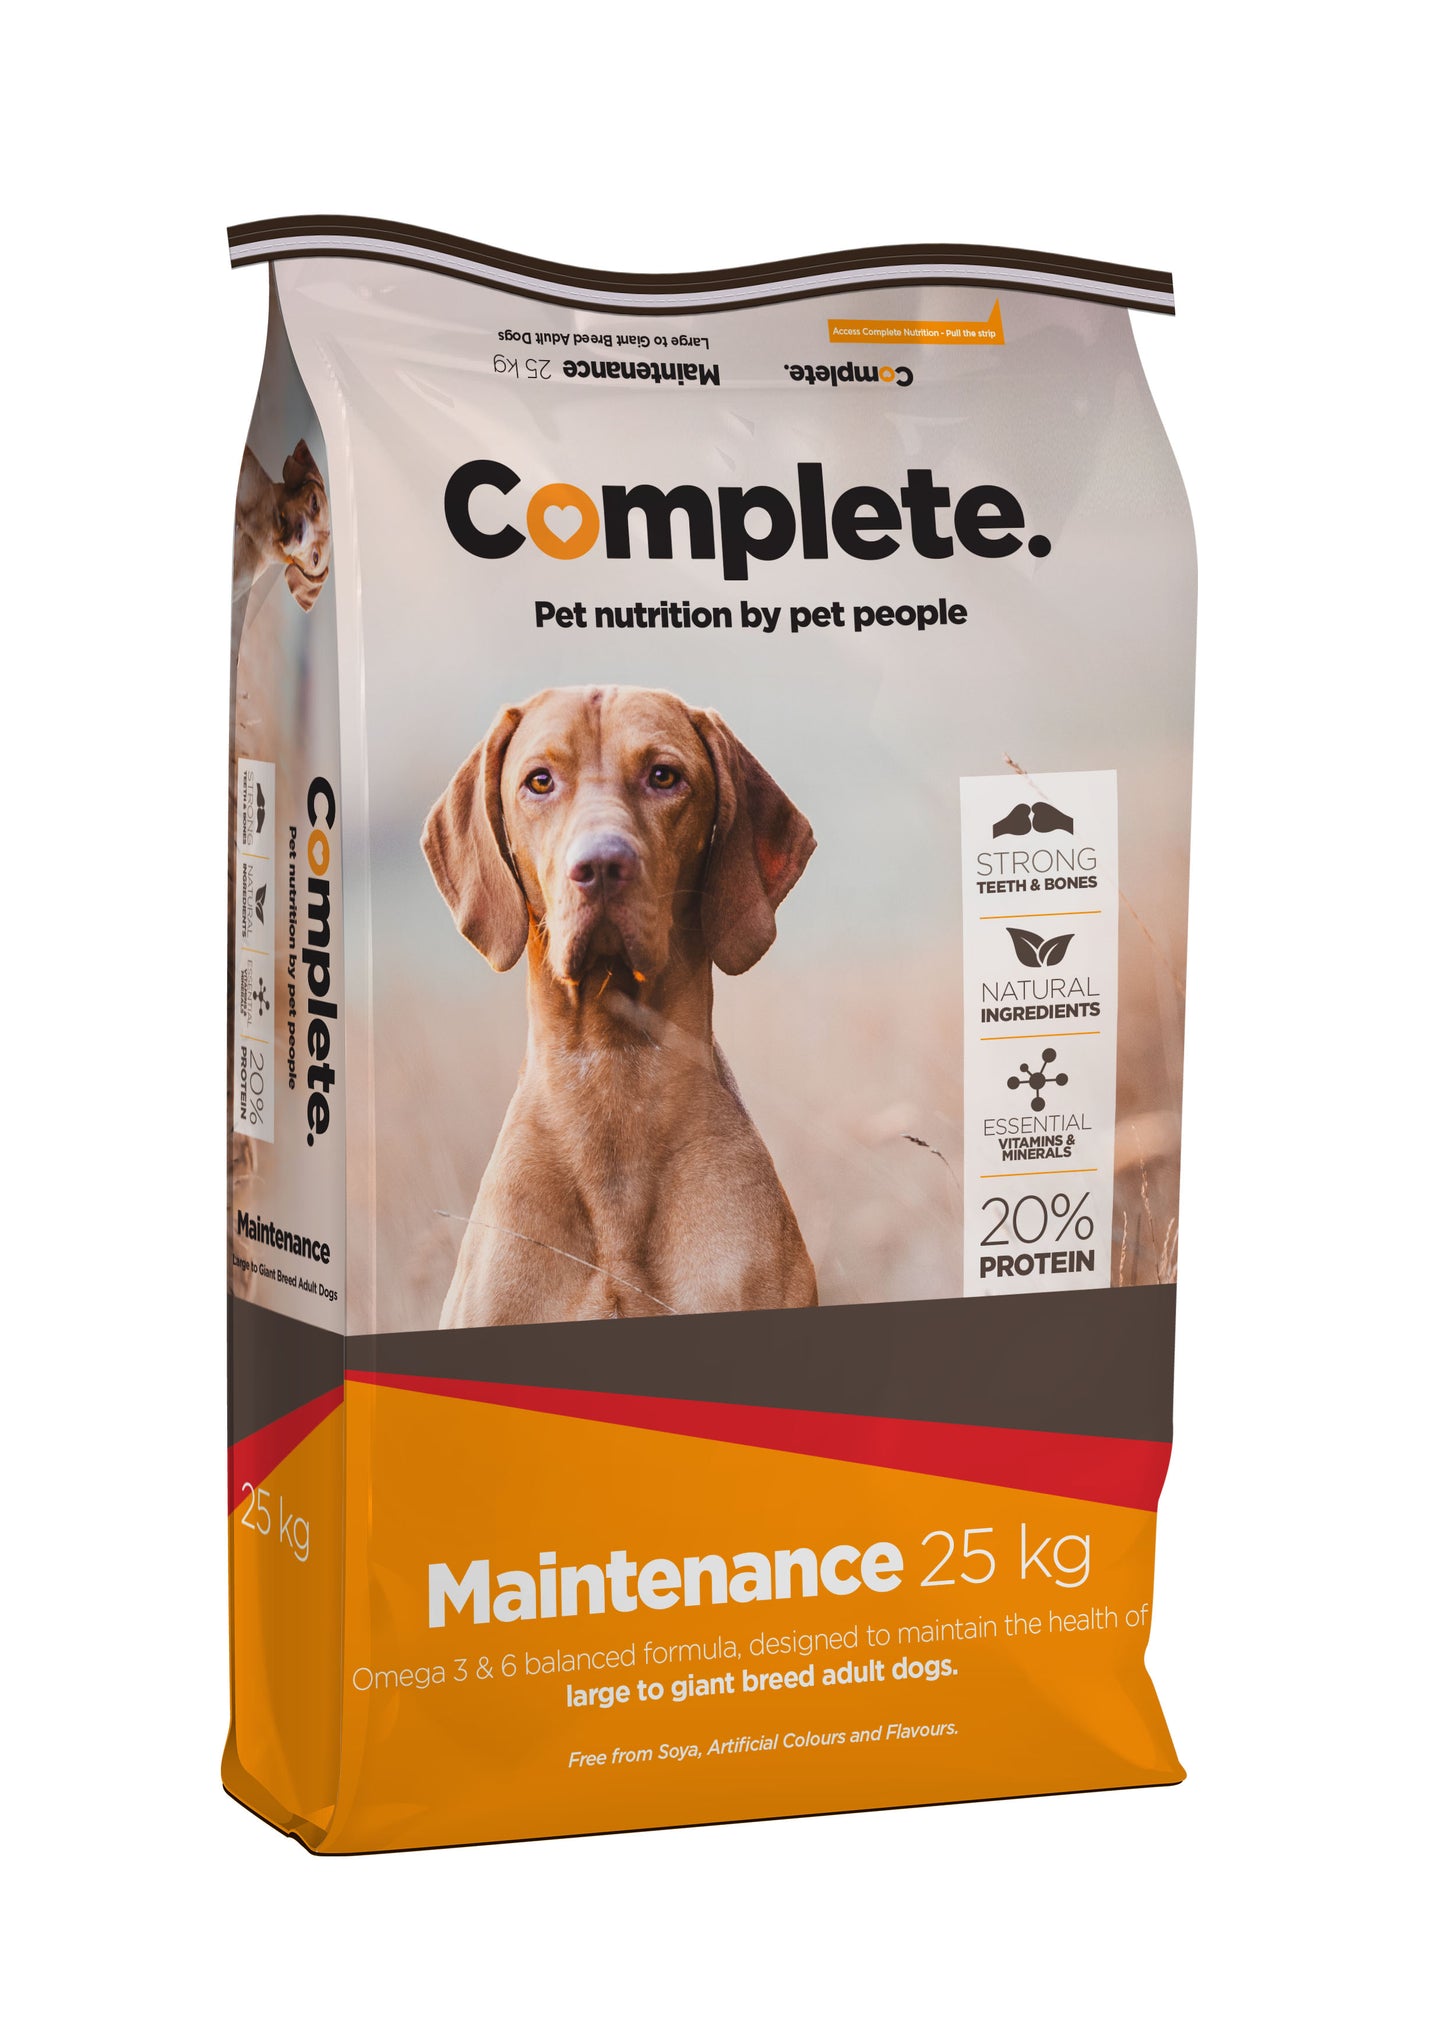 Maintenance 25kg Complete Pet Food For Large & Giant breed adult dogs from Pets Planet - South Africa’s No1 Online Pet Store for premium pet products, best pet store near me, Dog food, pet food, dog wet food, dog bed, dog beds, washable dog bed, takealot dog bed, plush dog bed, Complete Pet Nutrition, Complete pet nutrition dog food, hills dog food, optimizor dog food, royal canin dog food, jock dog food, bobtail dog food, canine cuisine, acana dog food, best dog food, dog food near me, best dog food brands